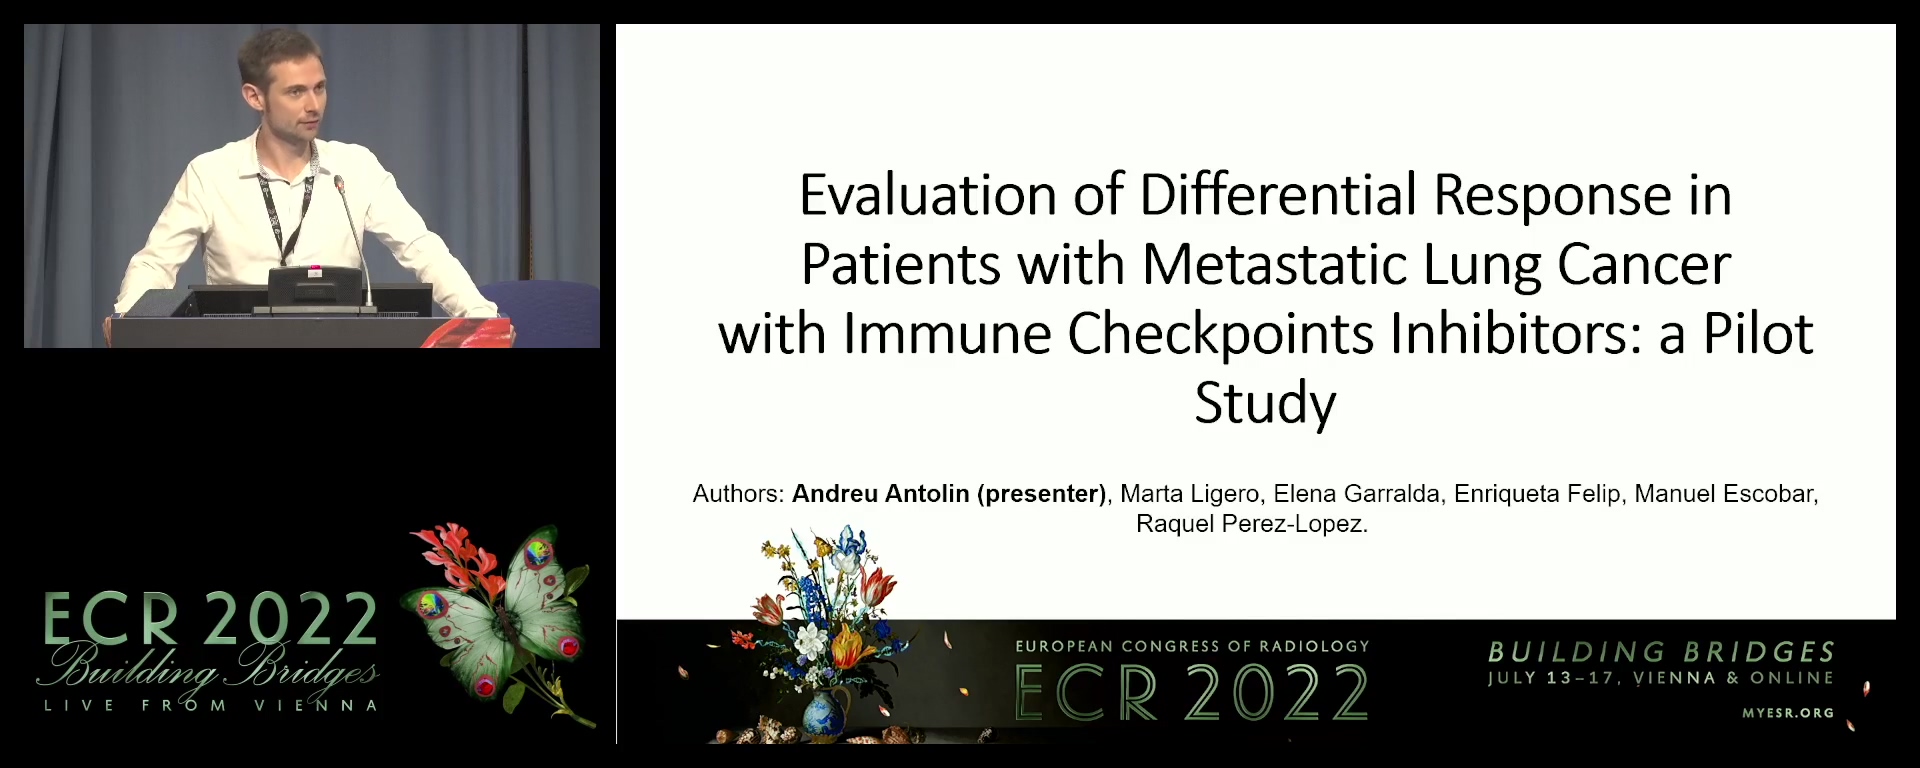 Evaluation of differential response in patients with metastatic lung cancer treated with immune checkpoint inhibitors: a pilot study - Andreu Antolín Redondo, Barcelona / ES